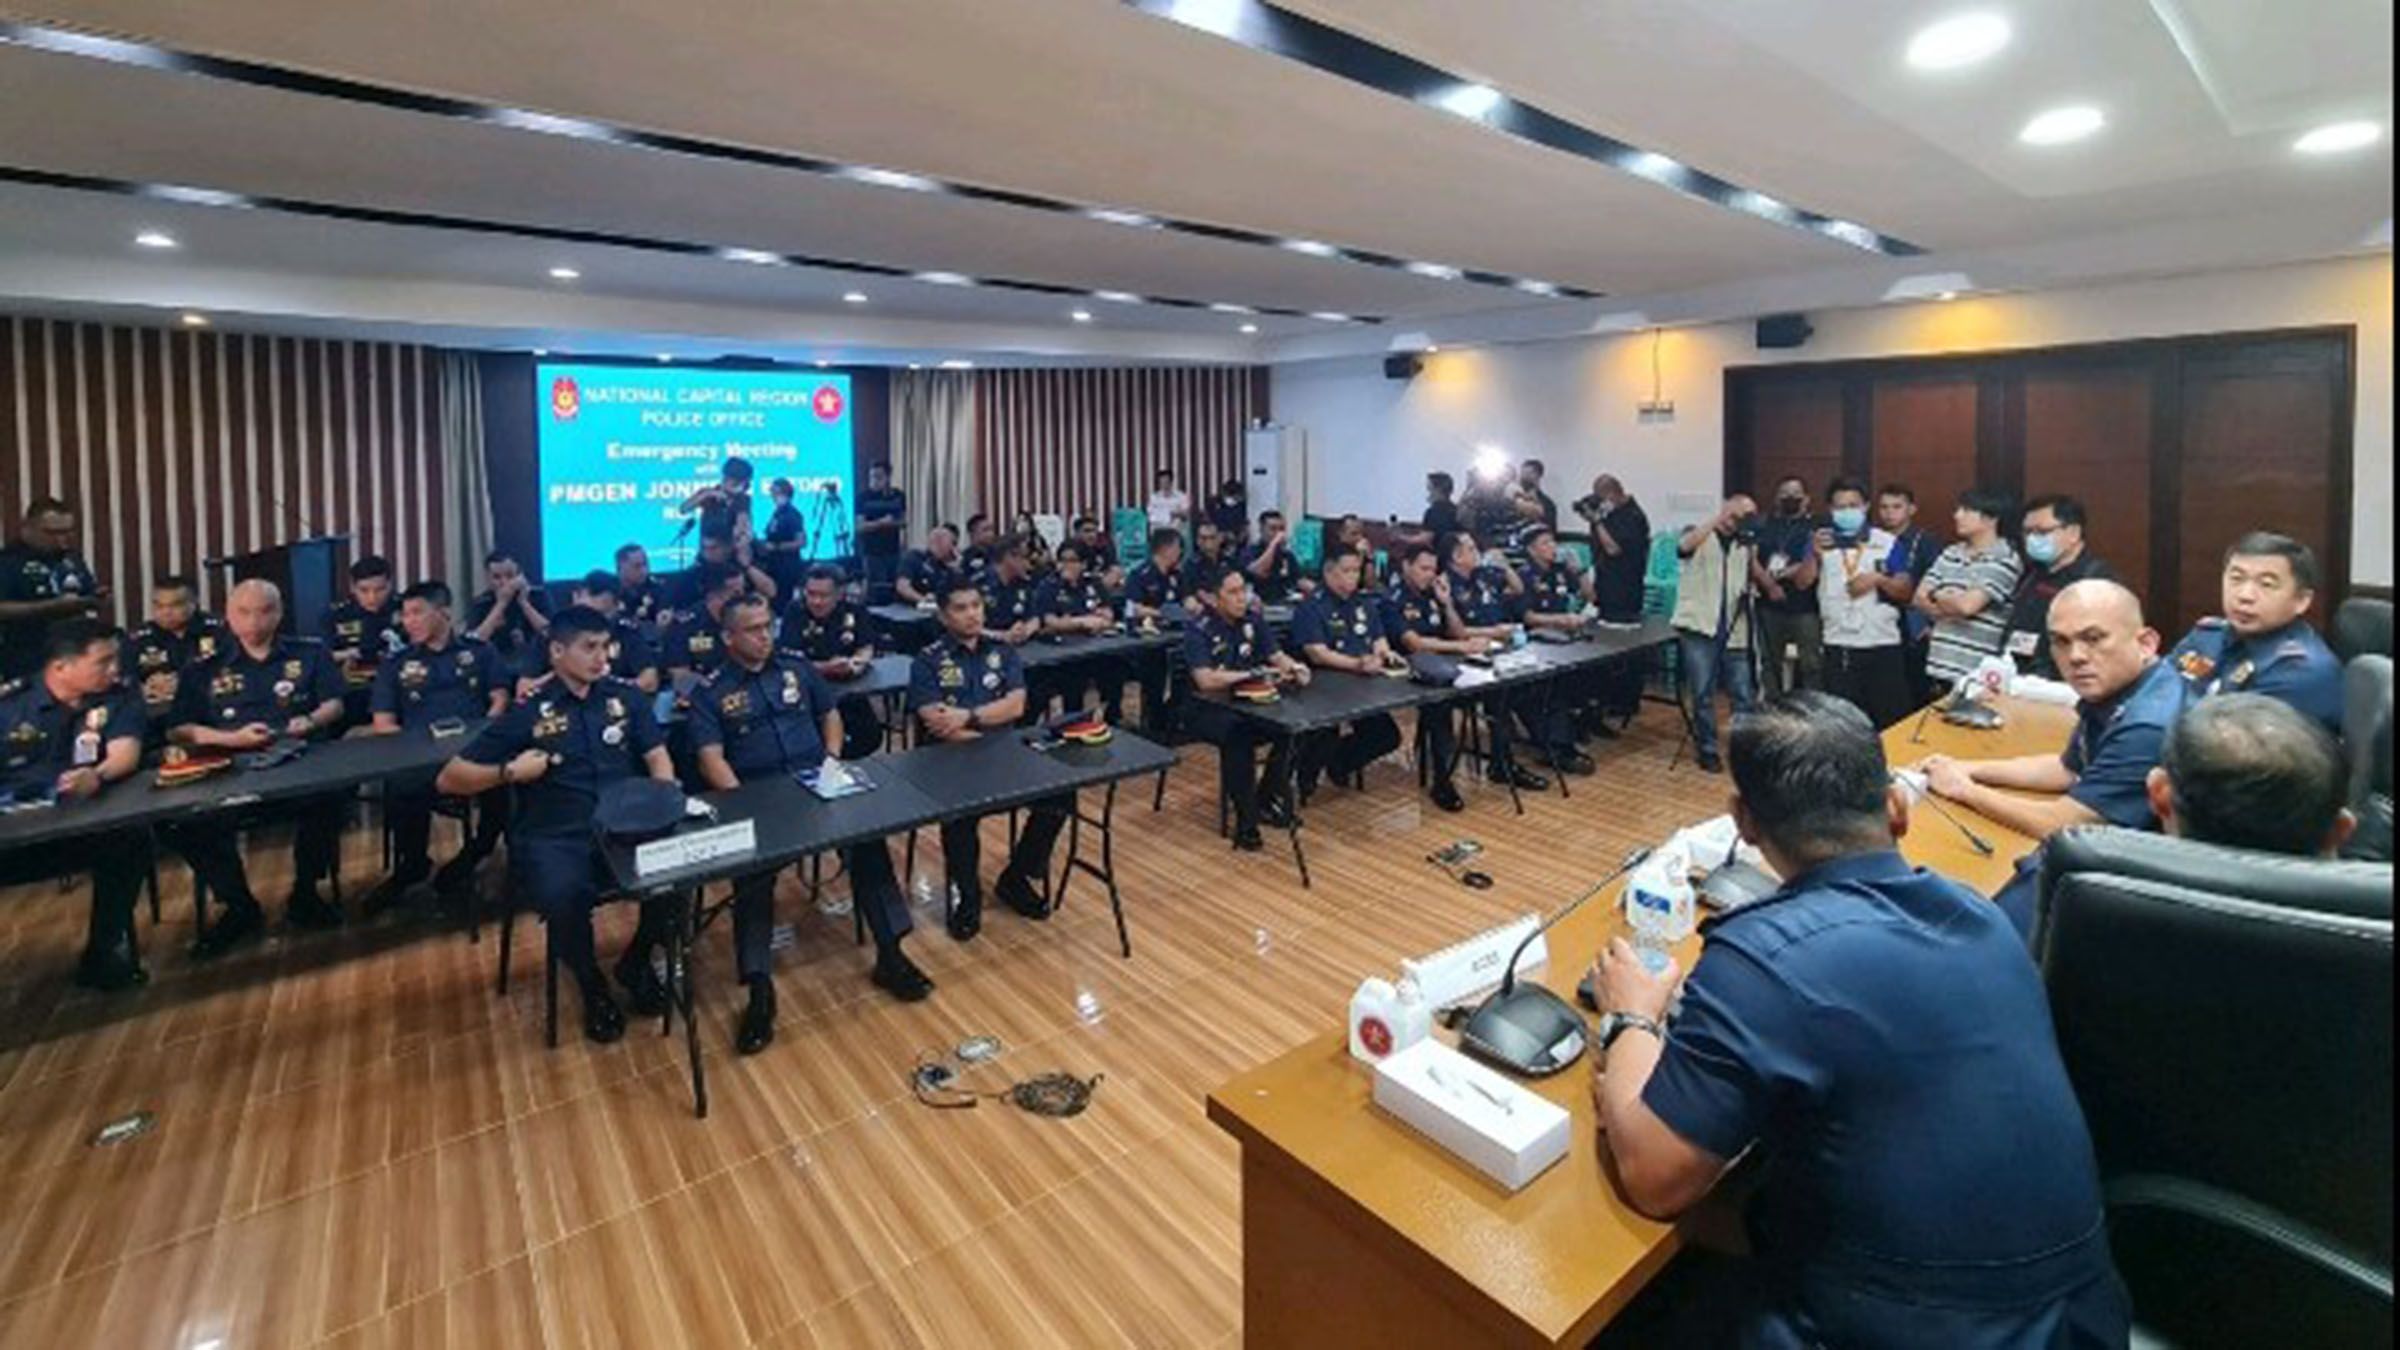 100% of NCRPO tendered courtesy resignation